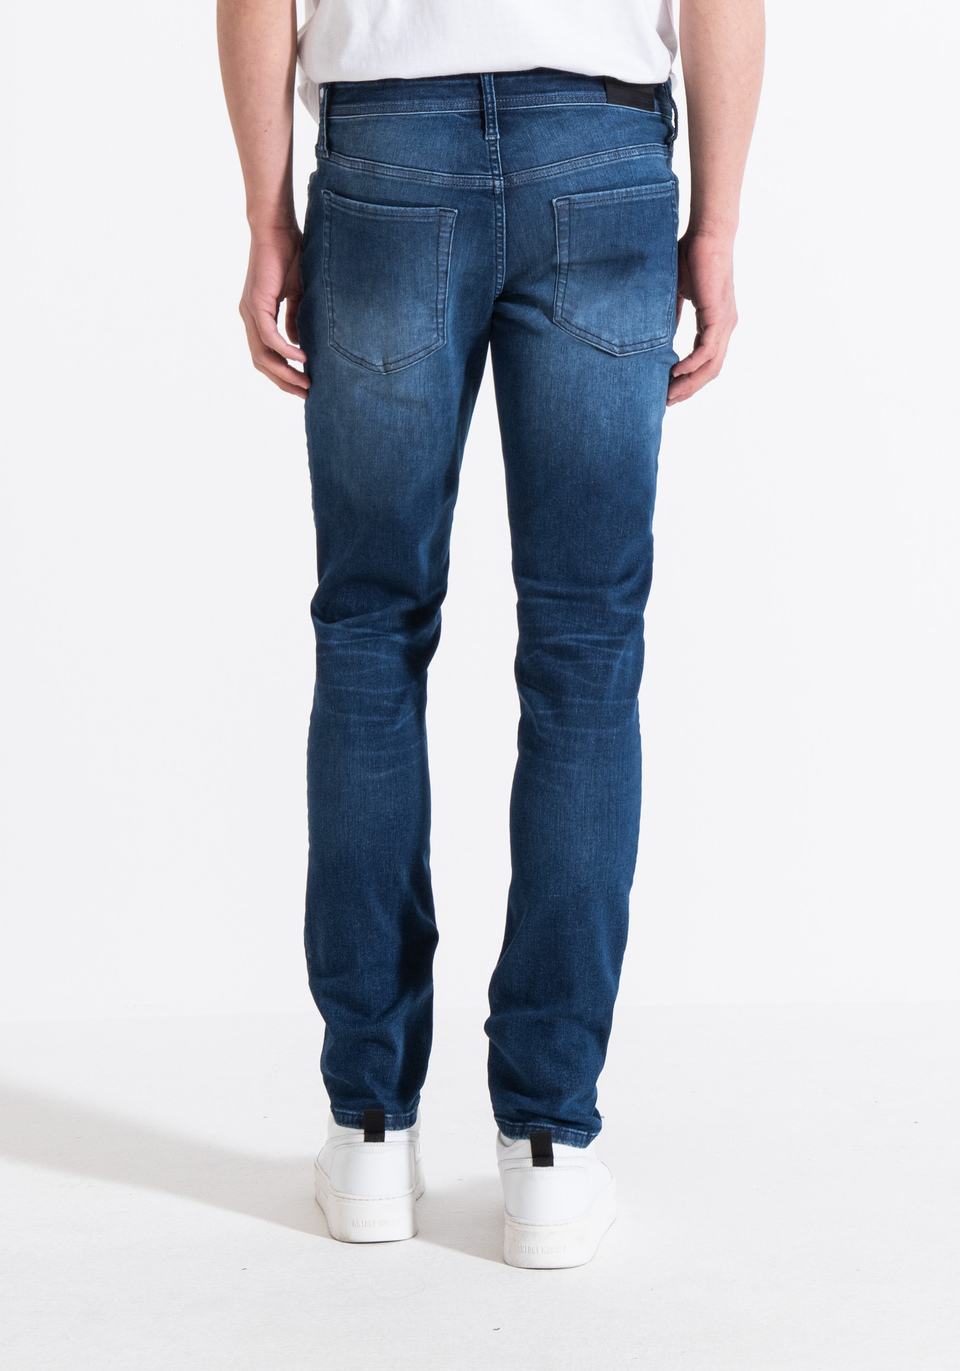 OZZY TAPERED FIT JEANS IN MID BLUE POWER STRETCH DENIM - Antony Morato Online Shop